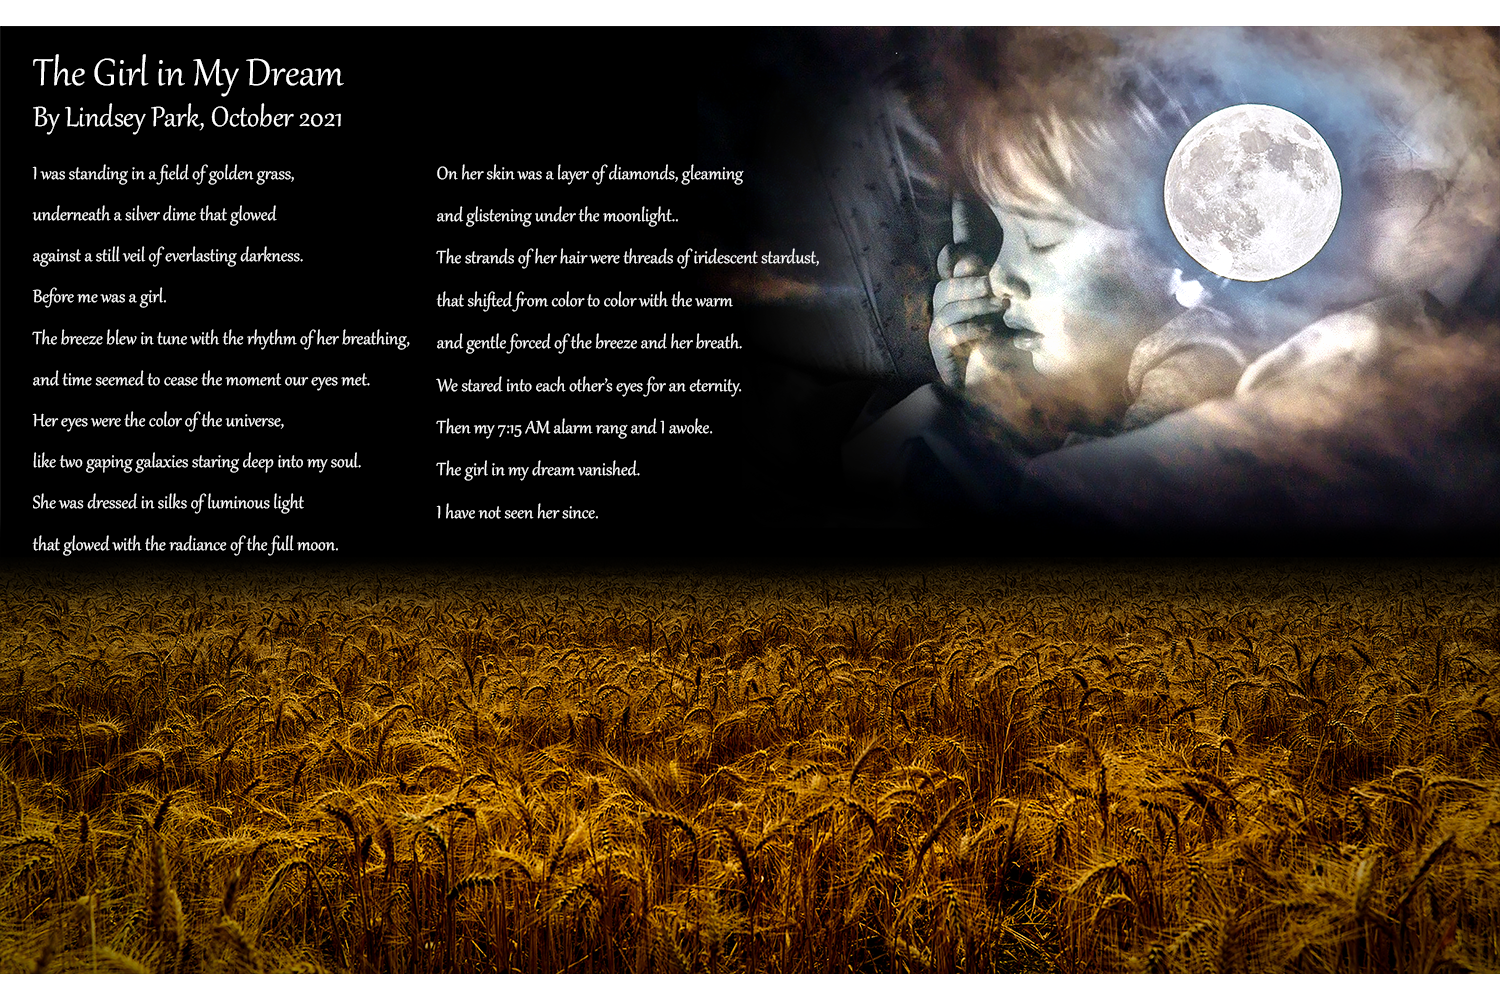 Poem by Lindsey Park The Girl in My Dream